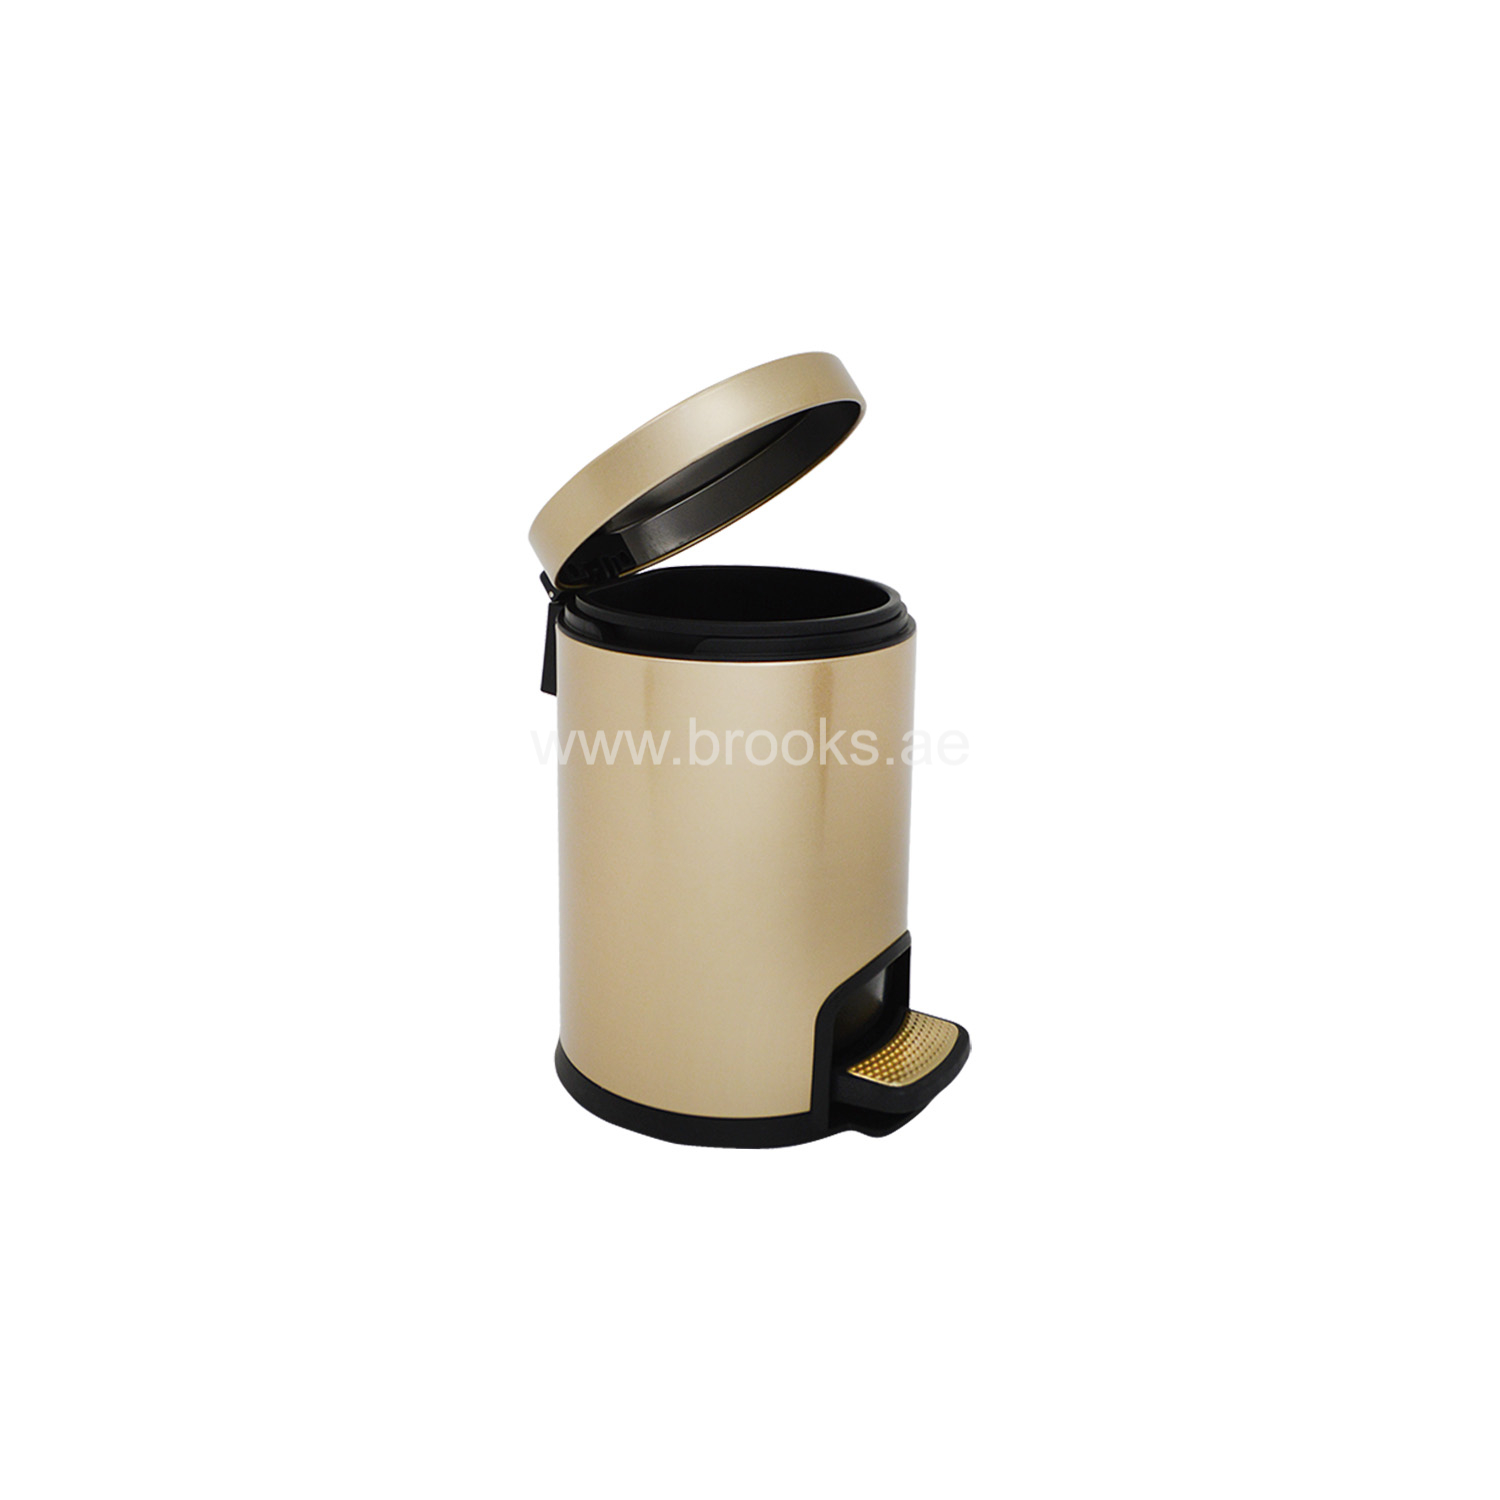 Brooks ACTOS Pedal Bin champagne gold 5LTR.